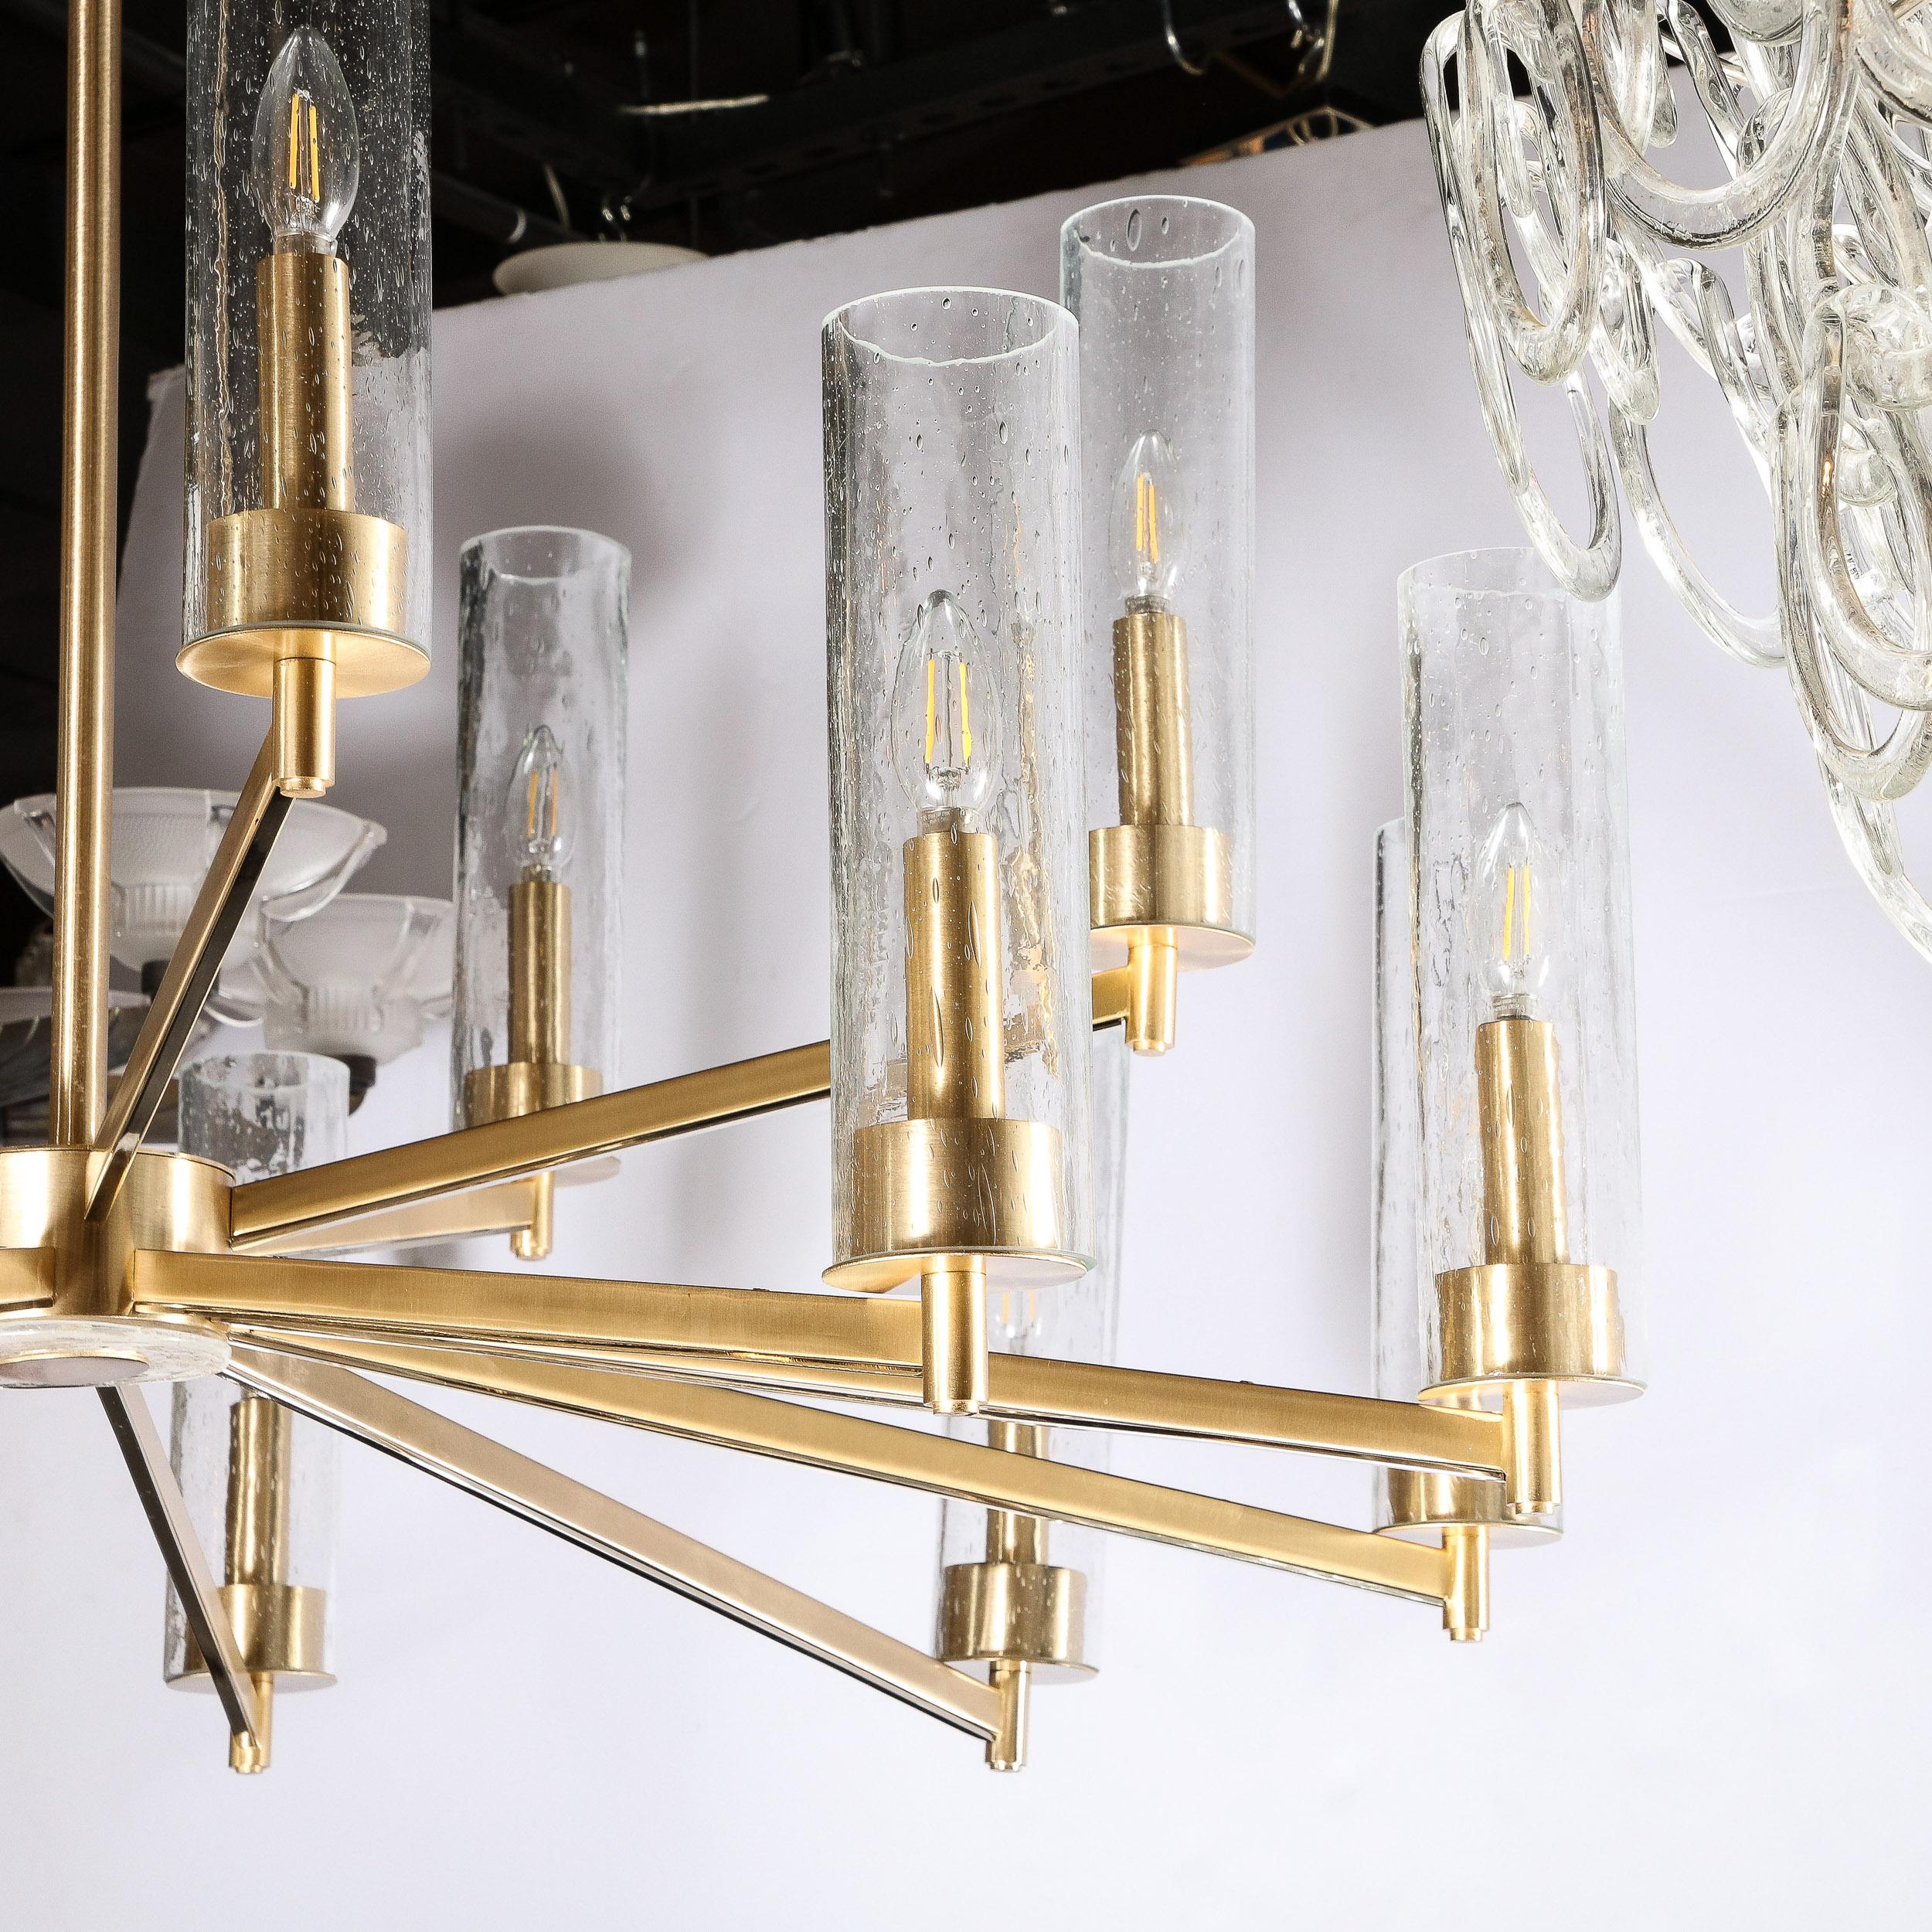 20th Century Modernist 15 Arm Chandelier in Brushed Brass & Transparent Cylindrical Shades For Sale